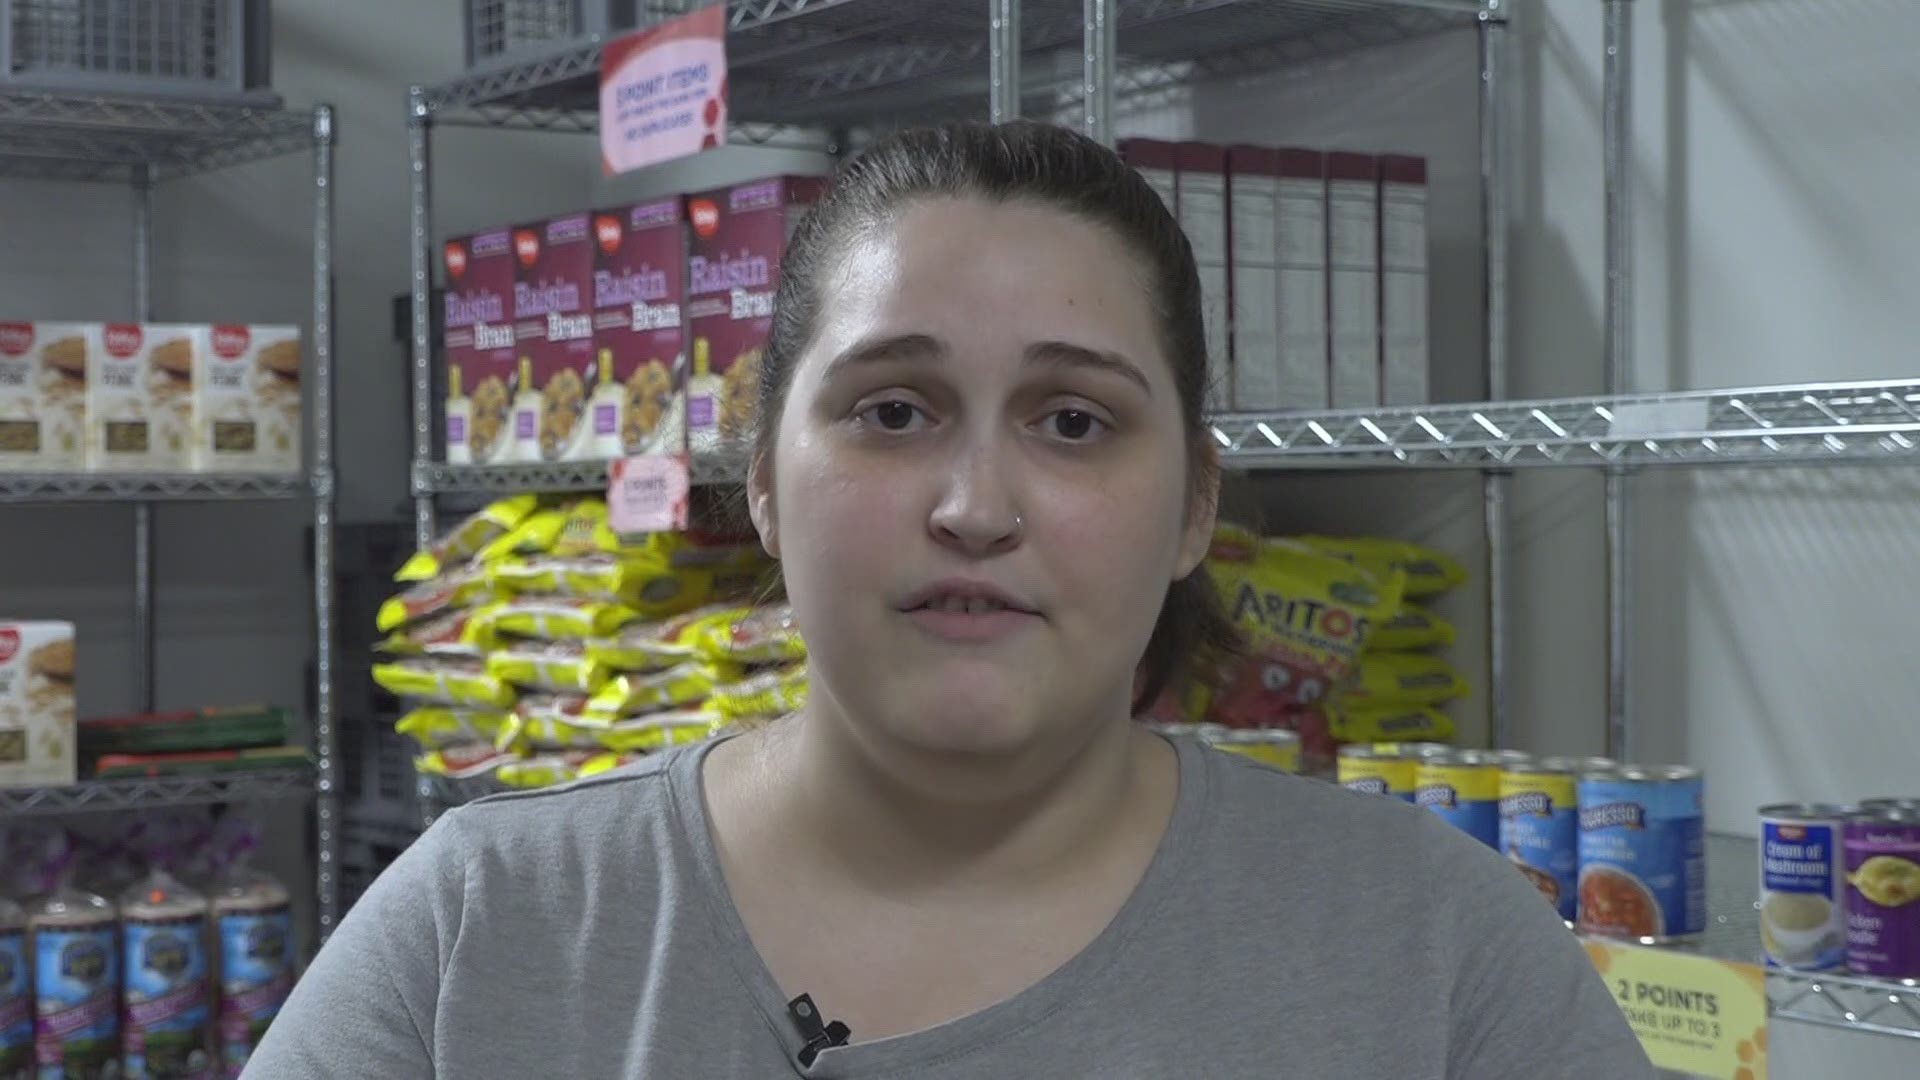 A new bill would make it easier for college students to sign up for the state's CalFresh program. Students like Tia Goodin who experience food insecurity would benefit from the law. "It is scary to have to wonder in the morning, 'Okay, how many meals can I eat today?' or if I'm going to have enough money for groceries that week," she said.